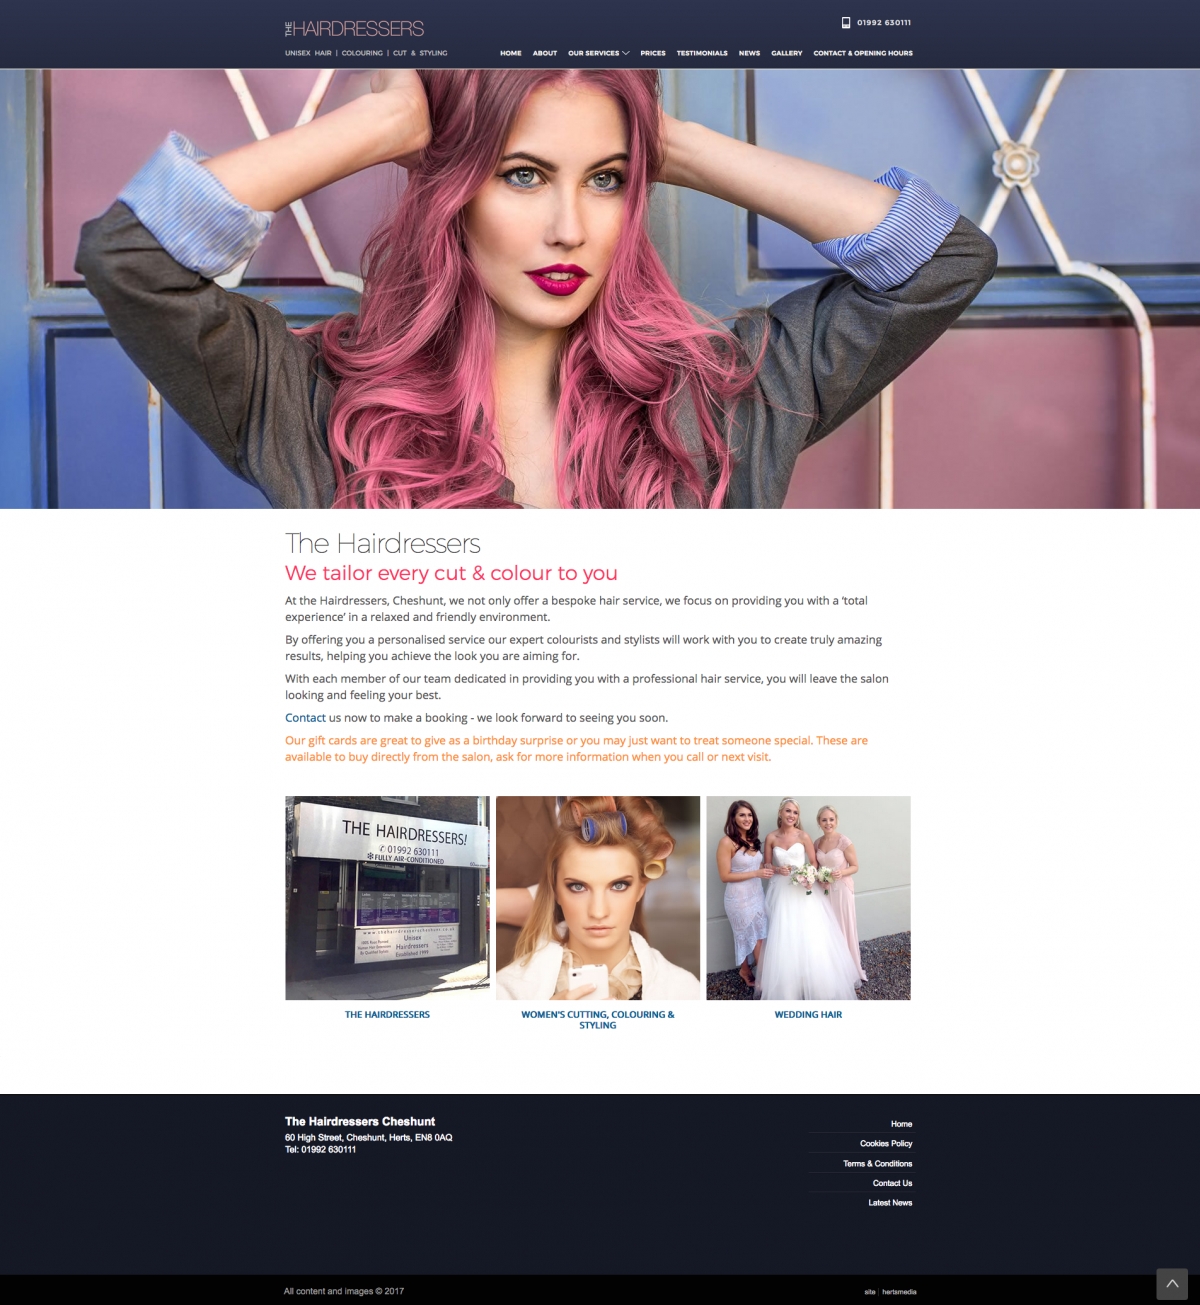 New website for The Hairdressers Cheshunt Brand new site, stunning images and full of information about their services